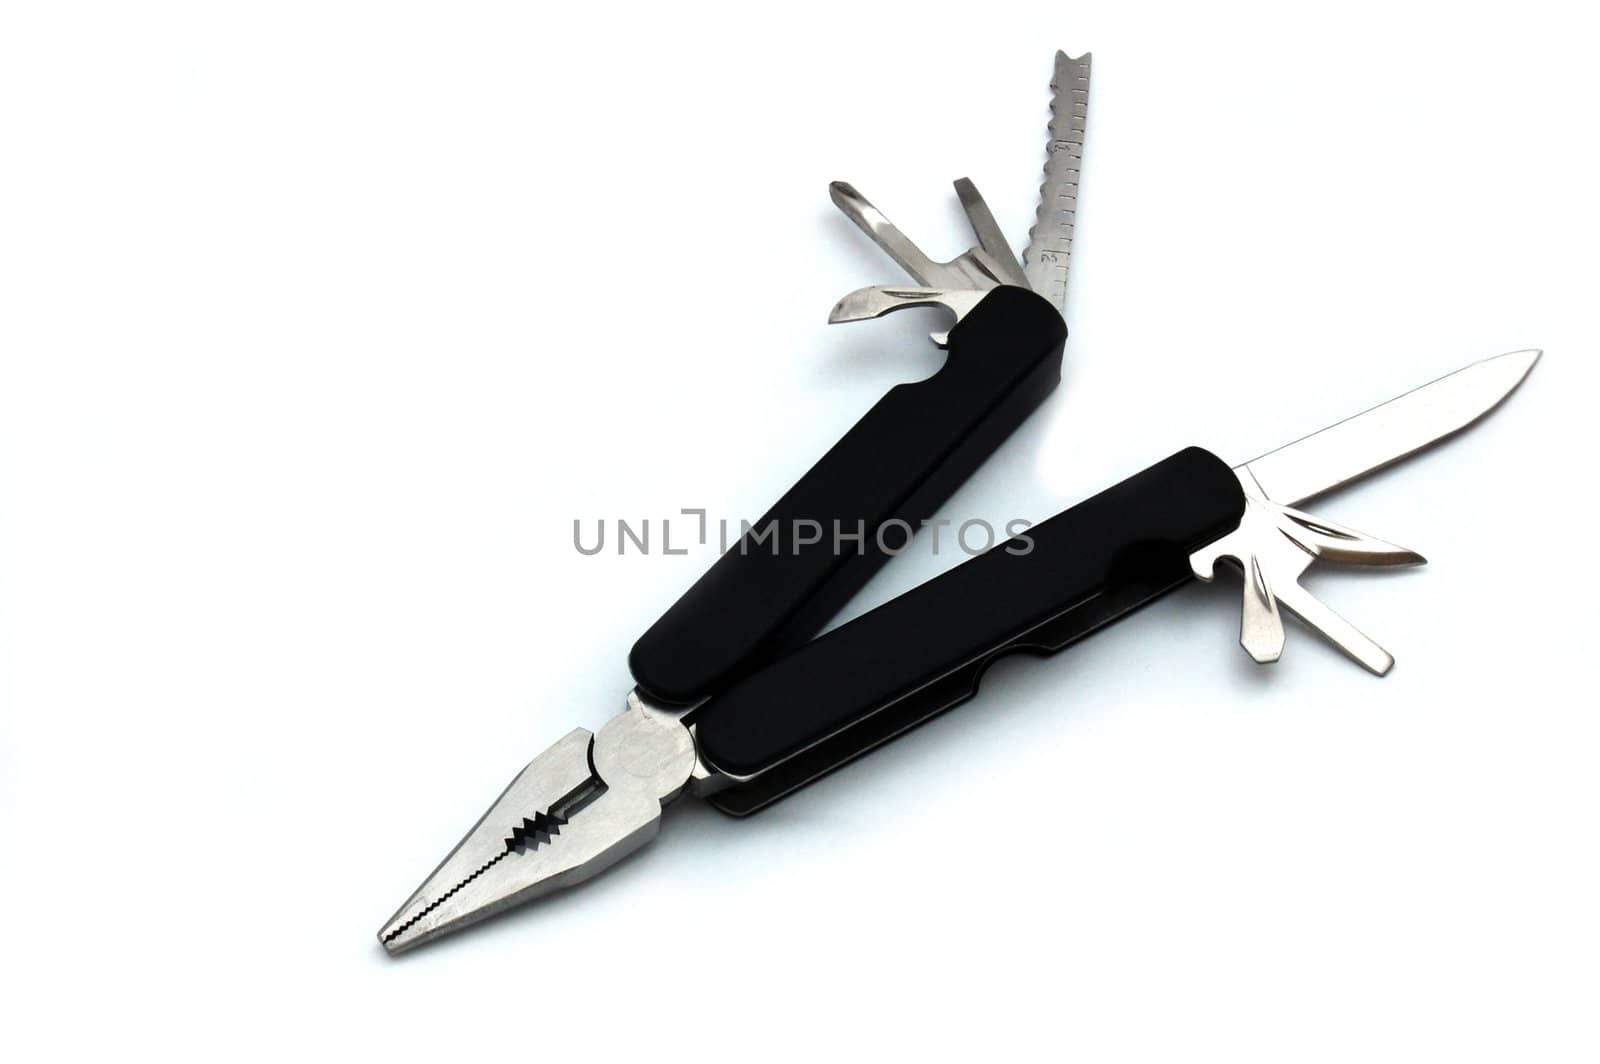 clasp knife isolated on the white background